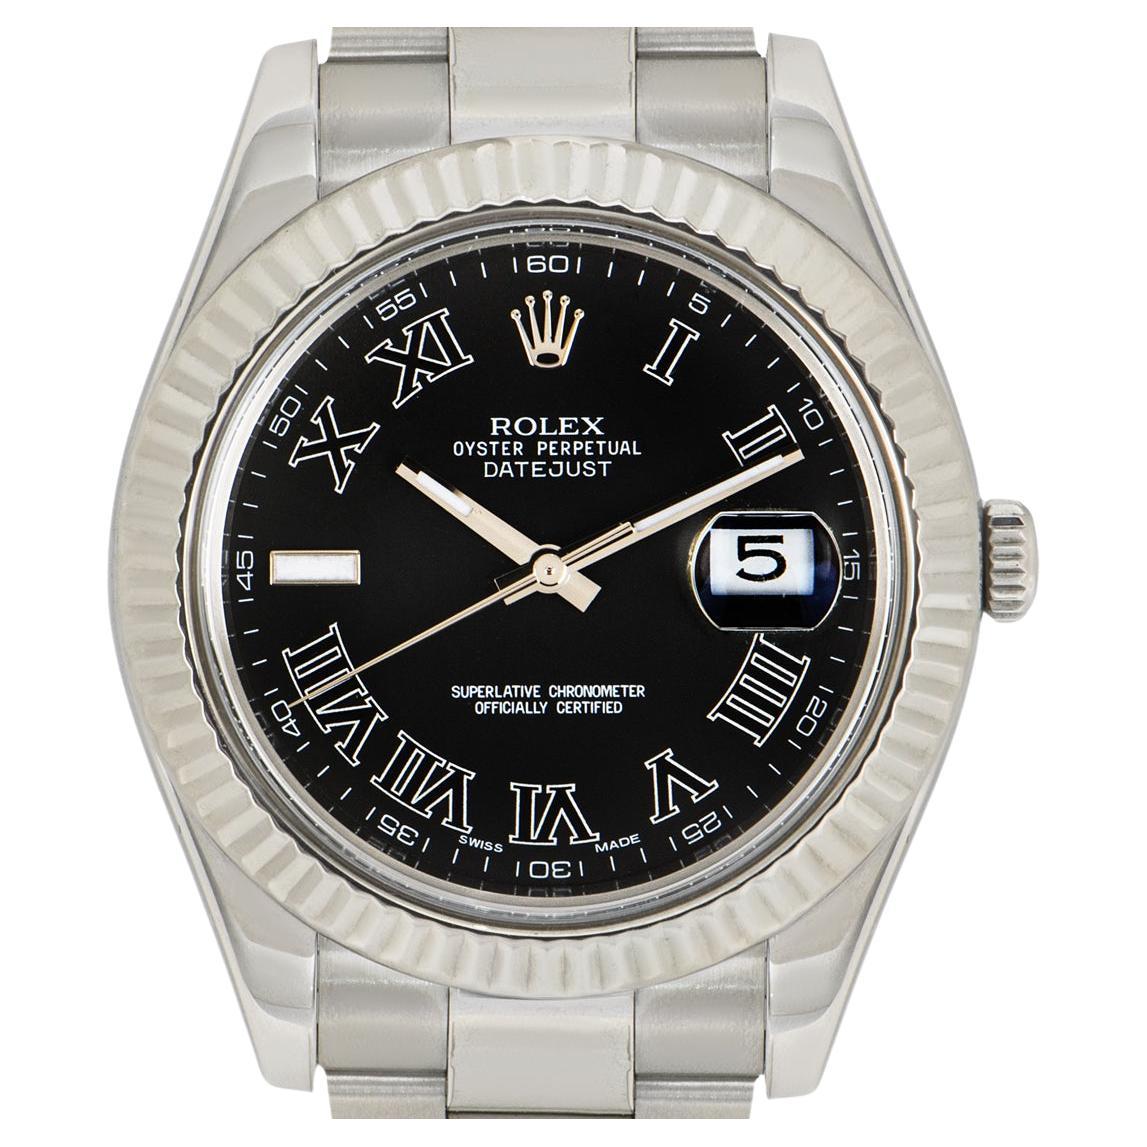 A Datejust II in stainless steel by Rolex. Featuring a black dial with roman numerals and a fixed fluted stainless steel bezel. Fitted with a sapphire crystal, self-winding automatic movement and an Oyster steel bracelet with a folding clasp. 

The